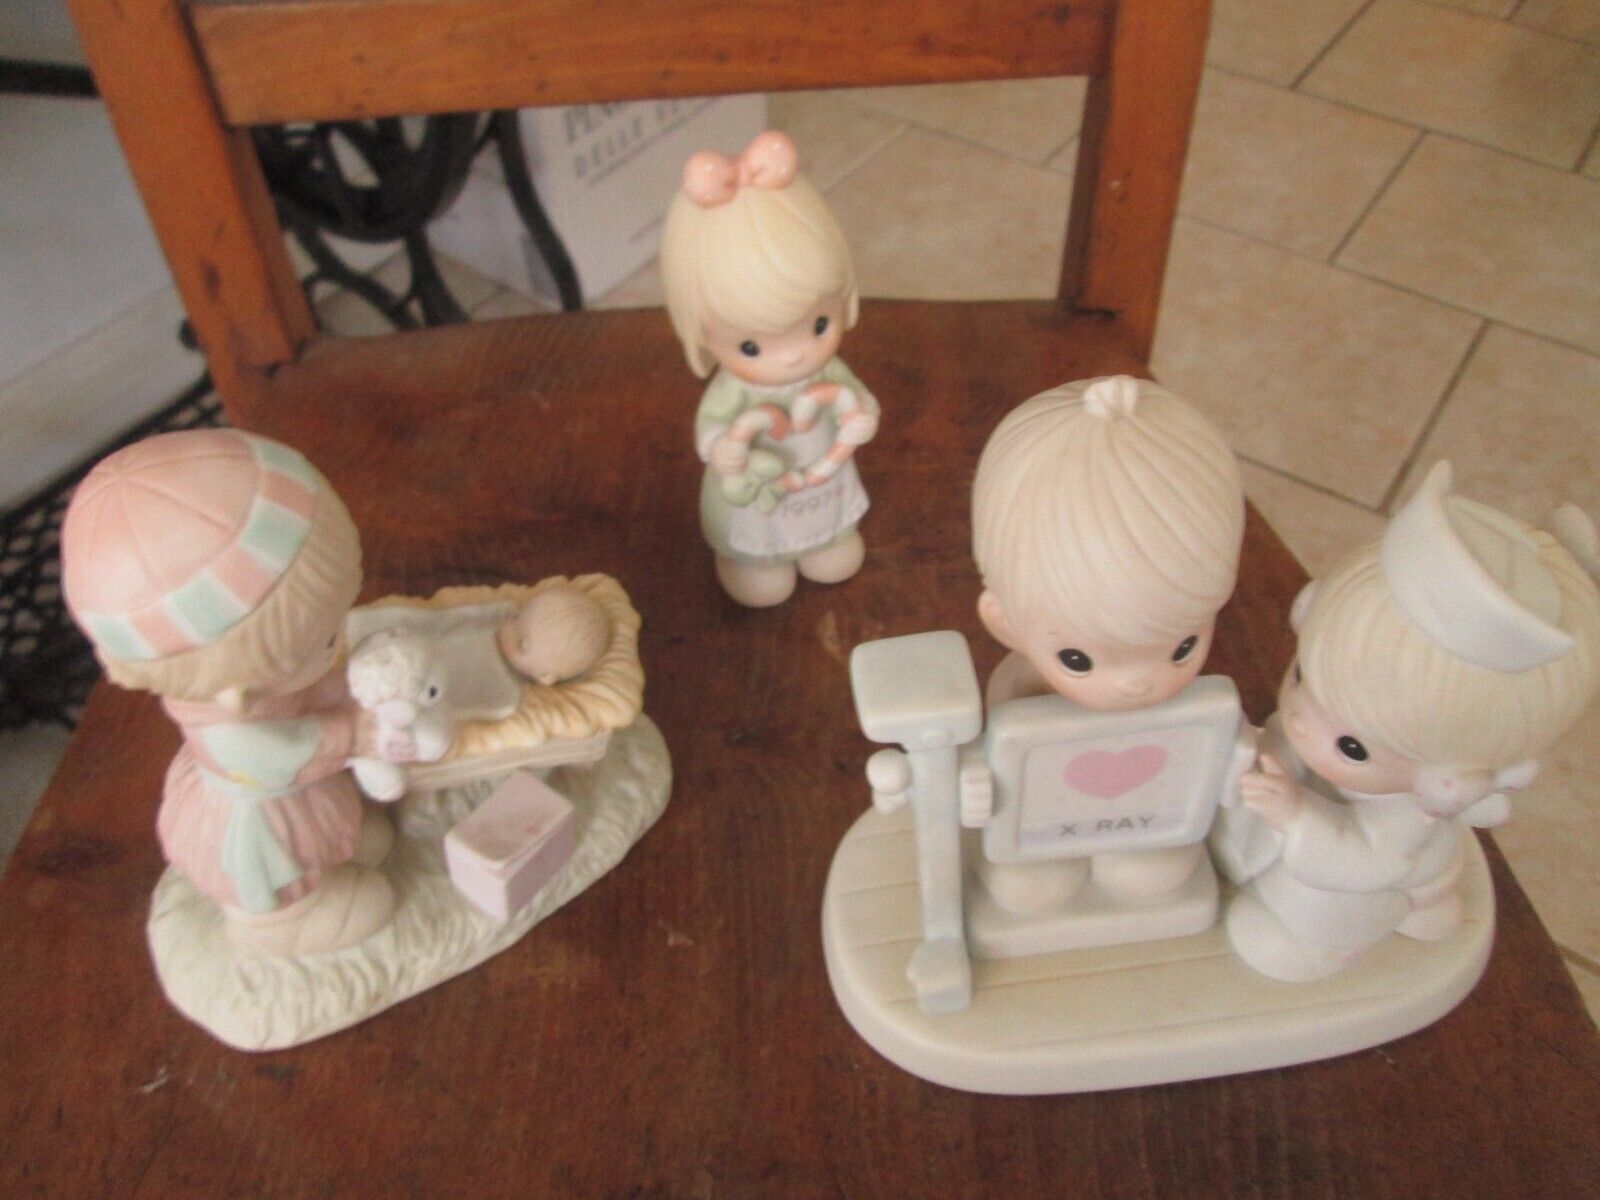 Lot of 3 Precious Moments figurines-all 3 for $12.00